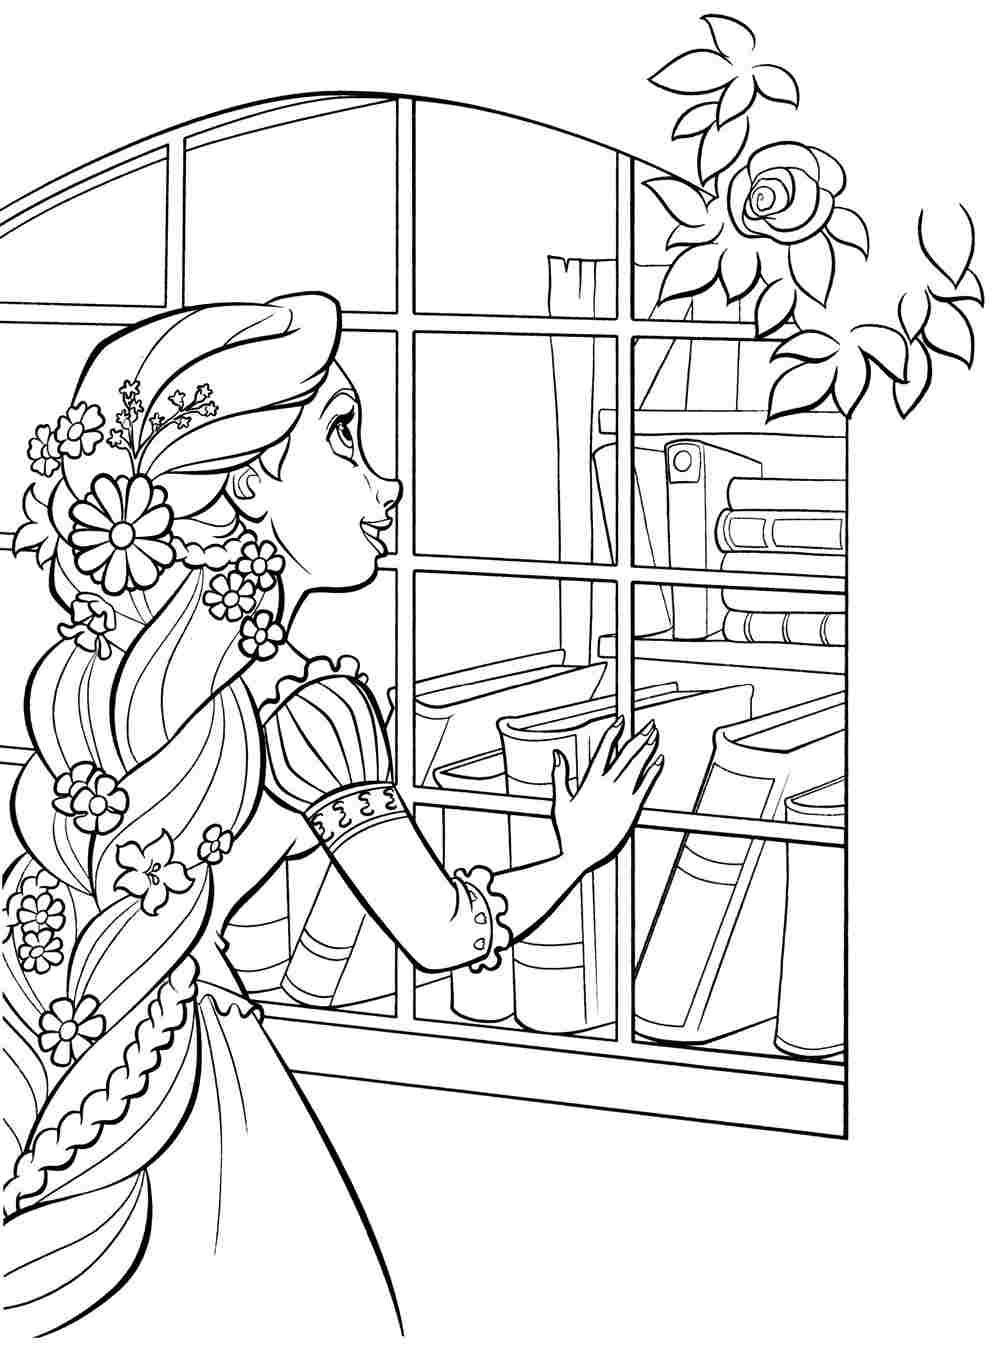 Boys Disney Coloring Pages
 printable free coloring pages disney princess tangled